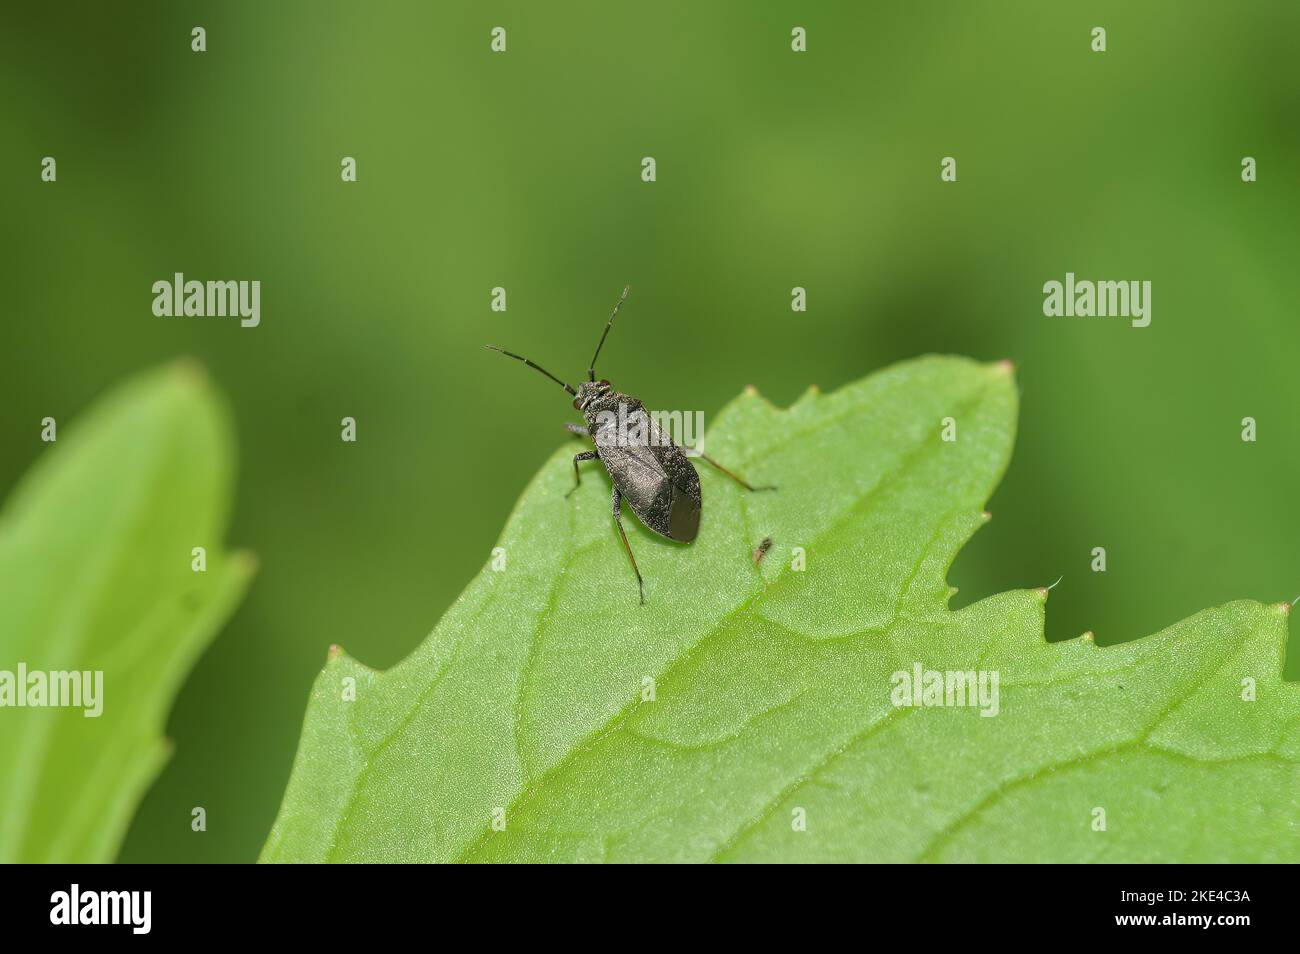 A shallow focus shot of a capsus ater hemipteran insect sitting on a green leaf with blur background Stock Photo